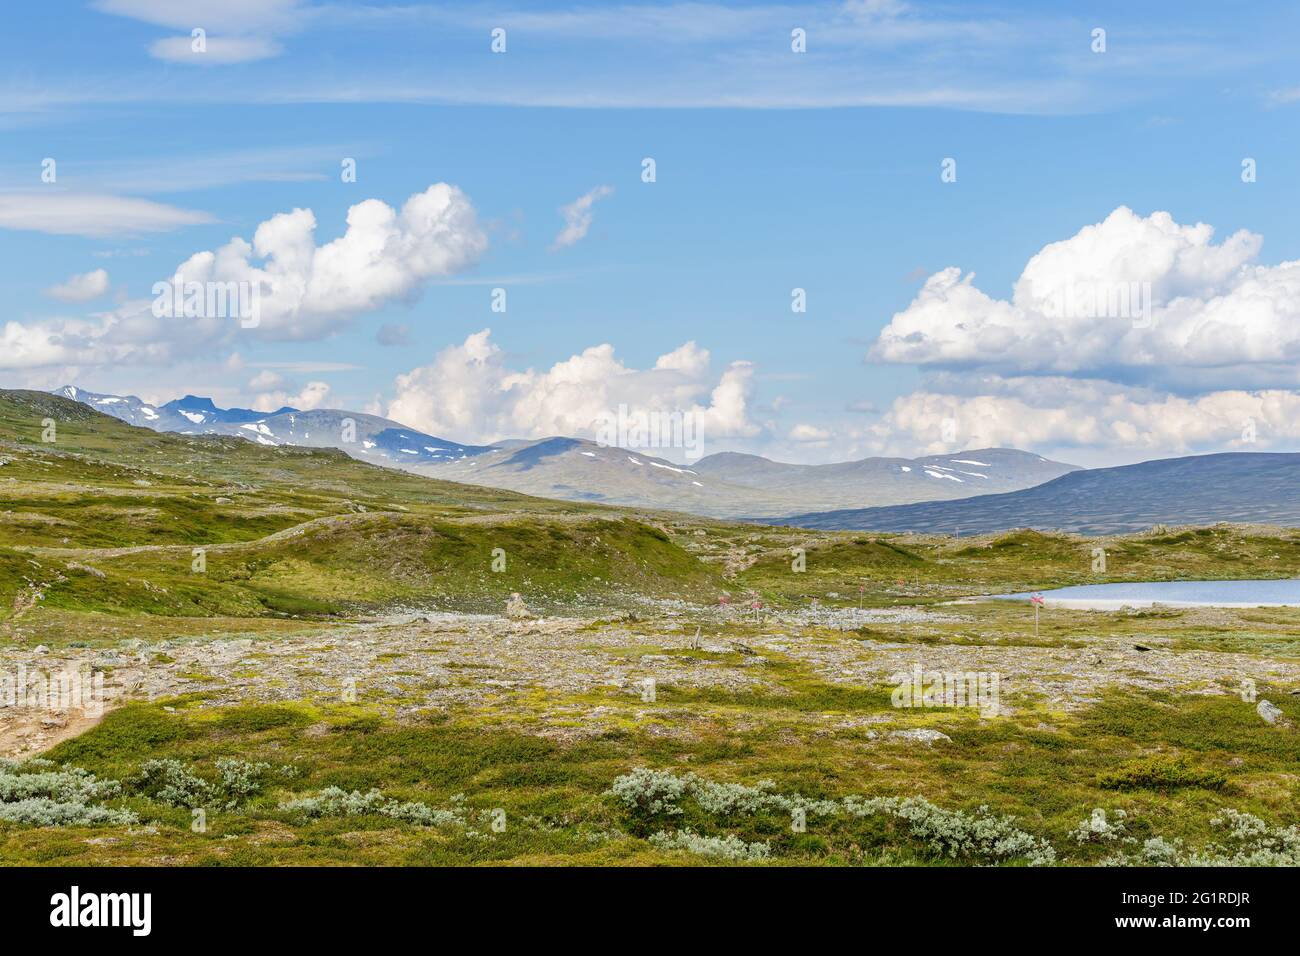 Mountainous landscape view in the swedish mountains Stock Photo